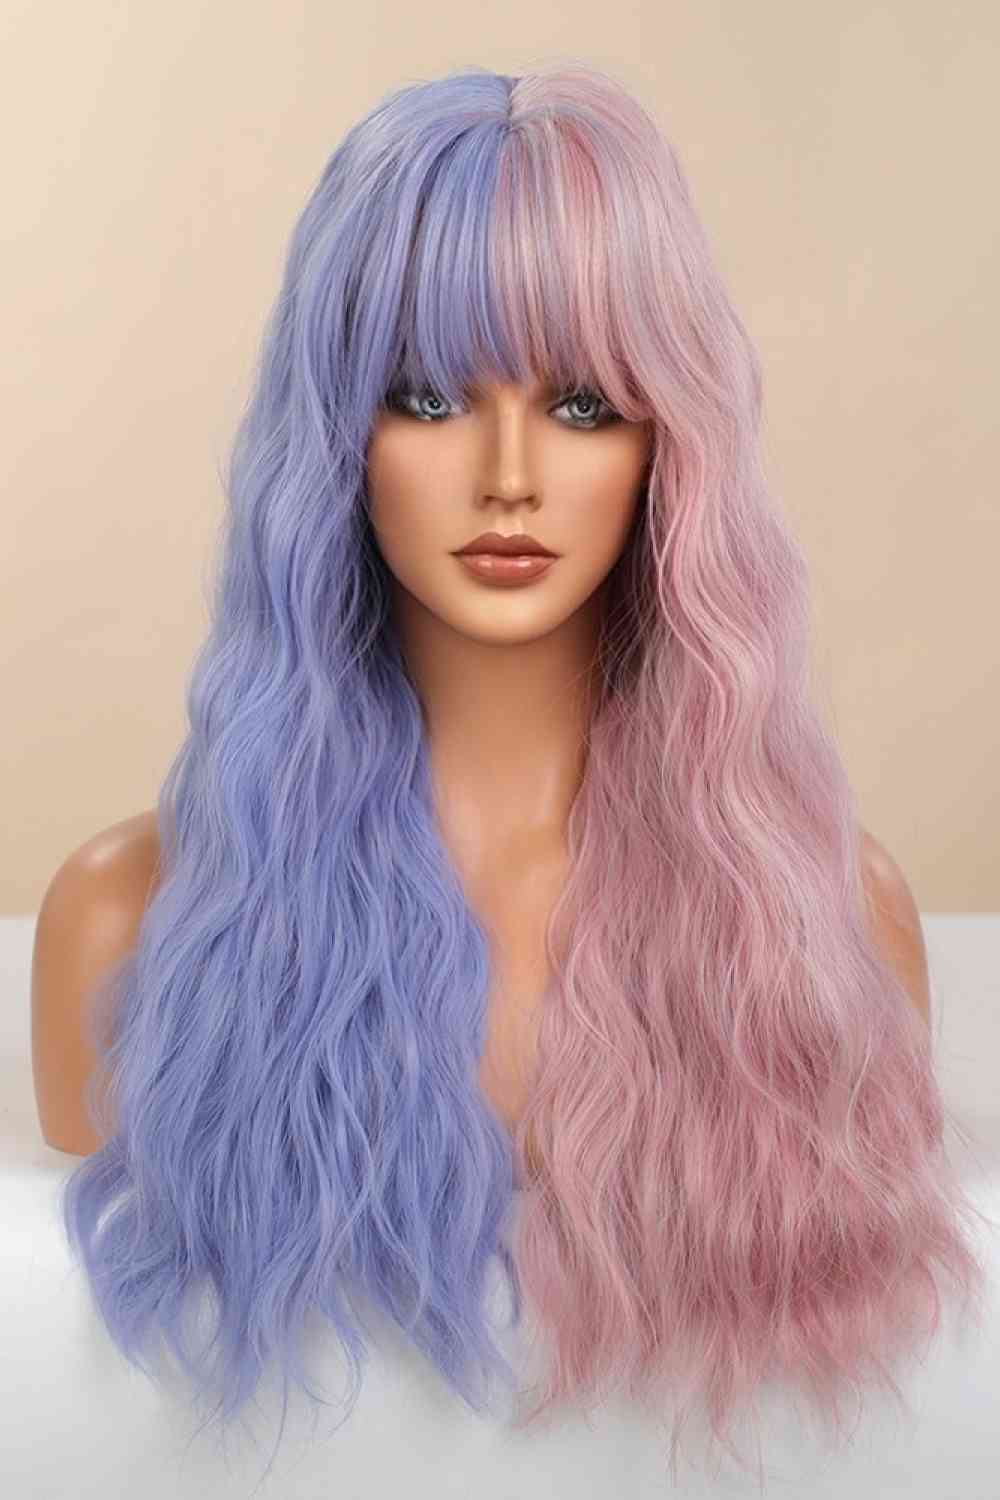 13*1" Full-Machine Wigs Synthetic Long Wave 26" in Blue/Pink Split Dye Blue/Pink Split Dye One Size